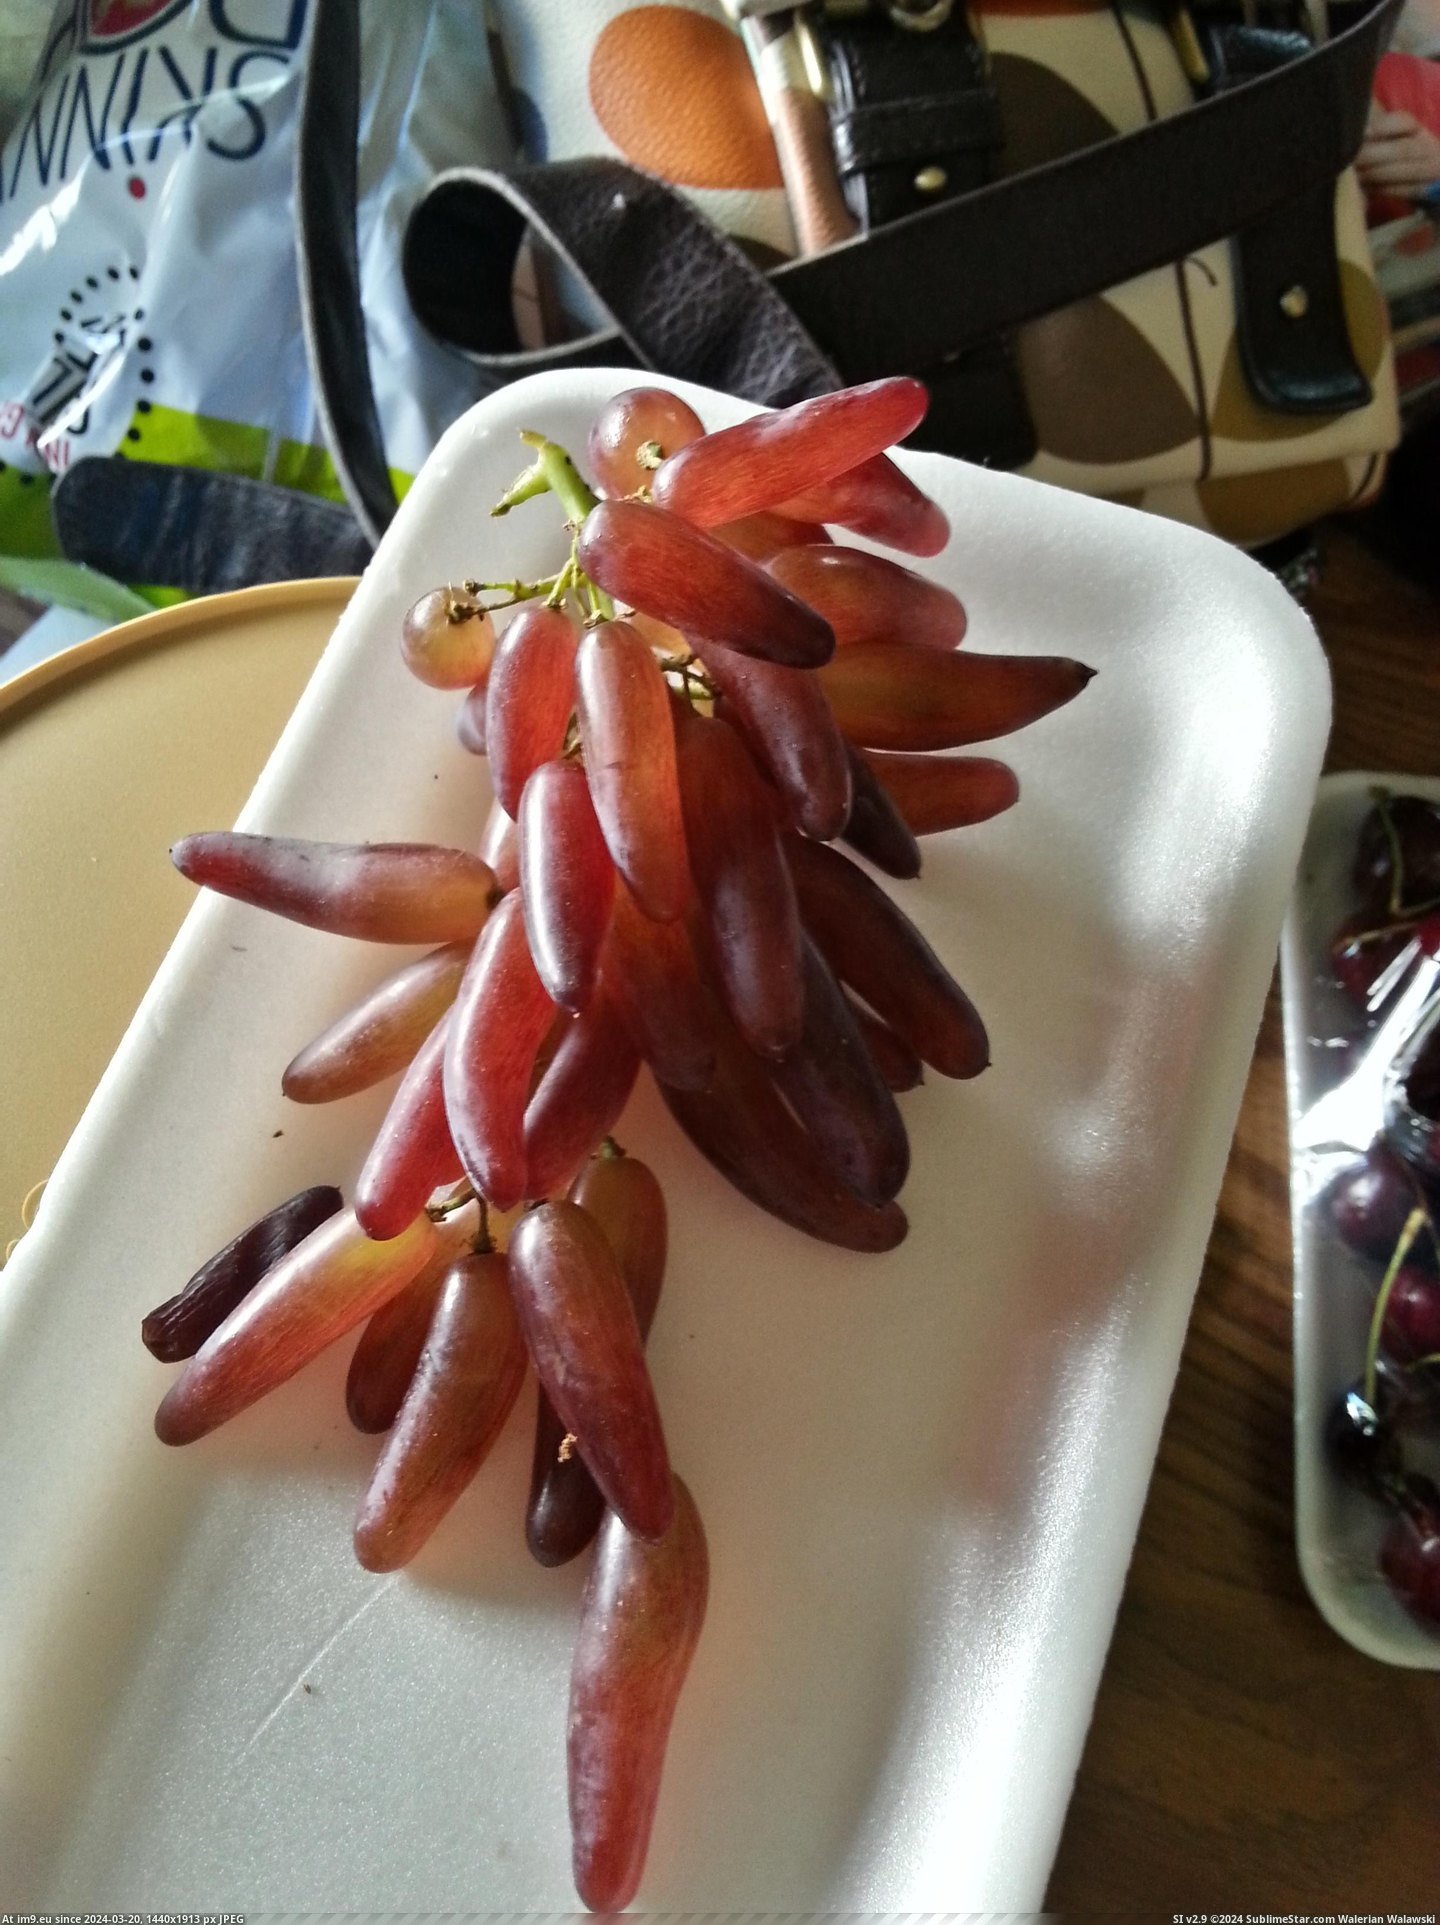 #Shaped #Fingers #Chili #Peppers #Grapes #Witches [Mildlyinteresting] Grapes shaped like chili peppers. They're known as Witches Fingers. Pic. (Obraz z album My r/MILDLYINTERESTING favs))